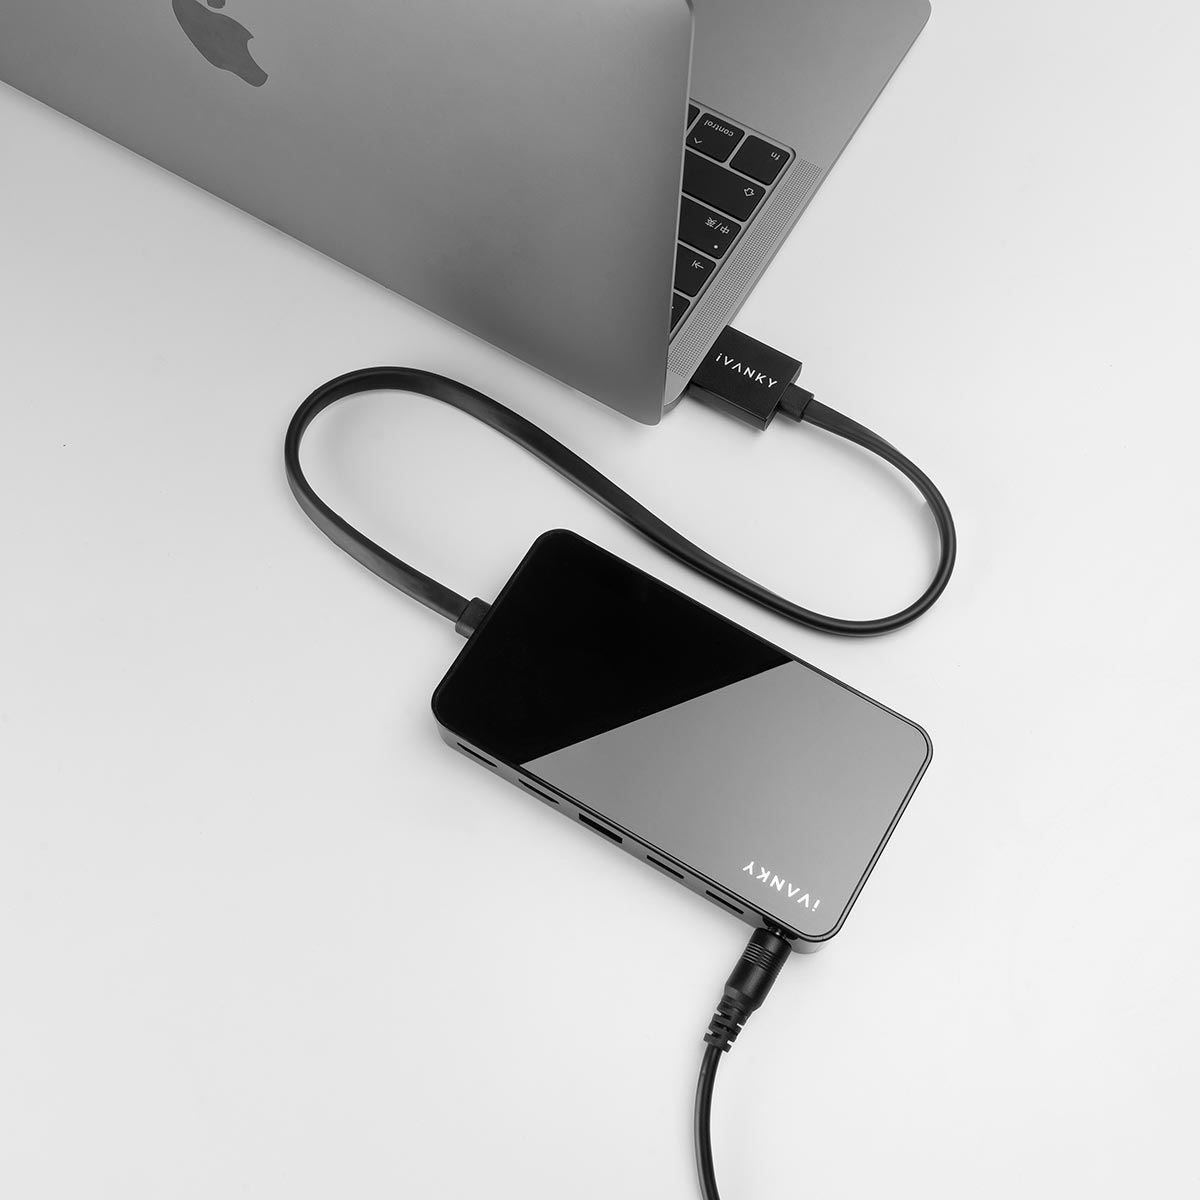 docking station for mac book pro 2017